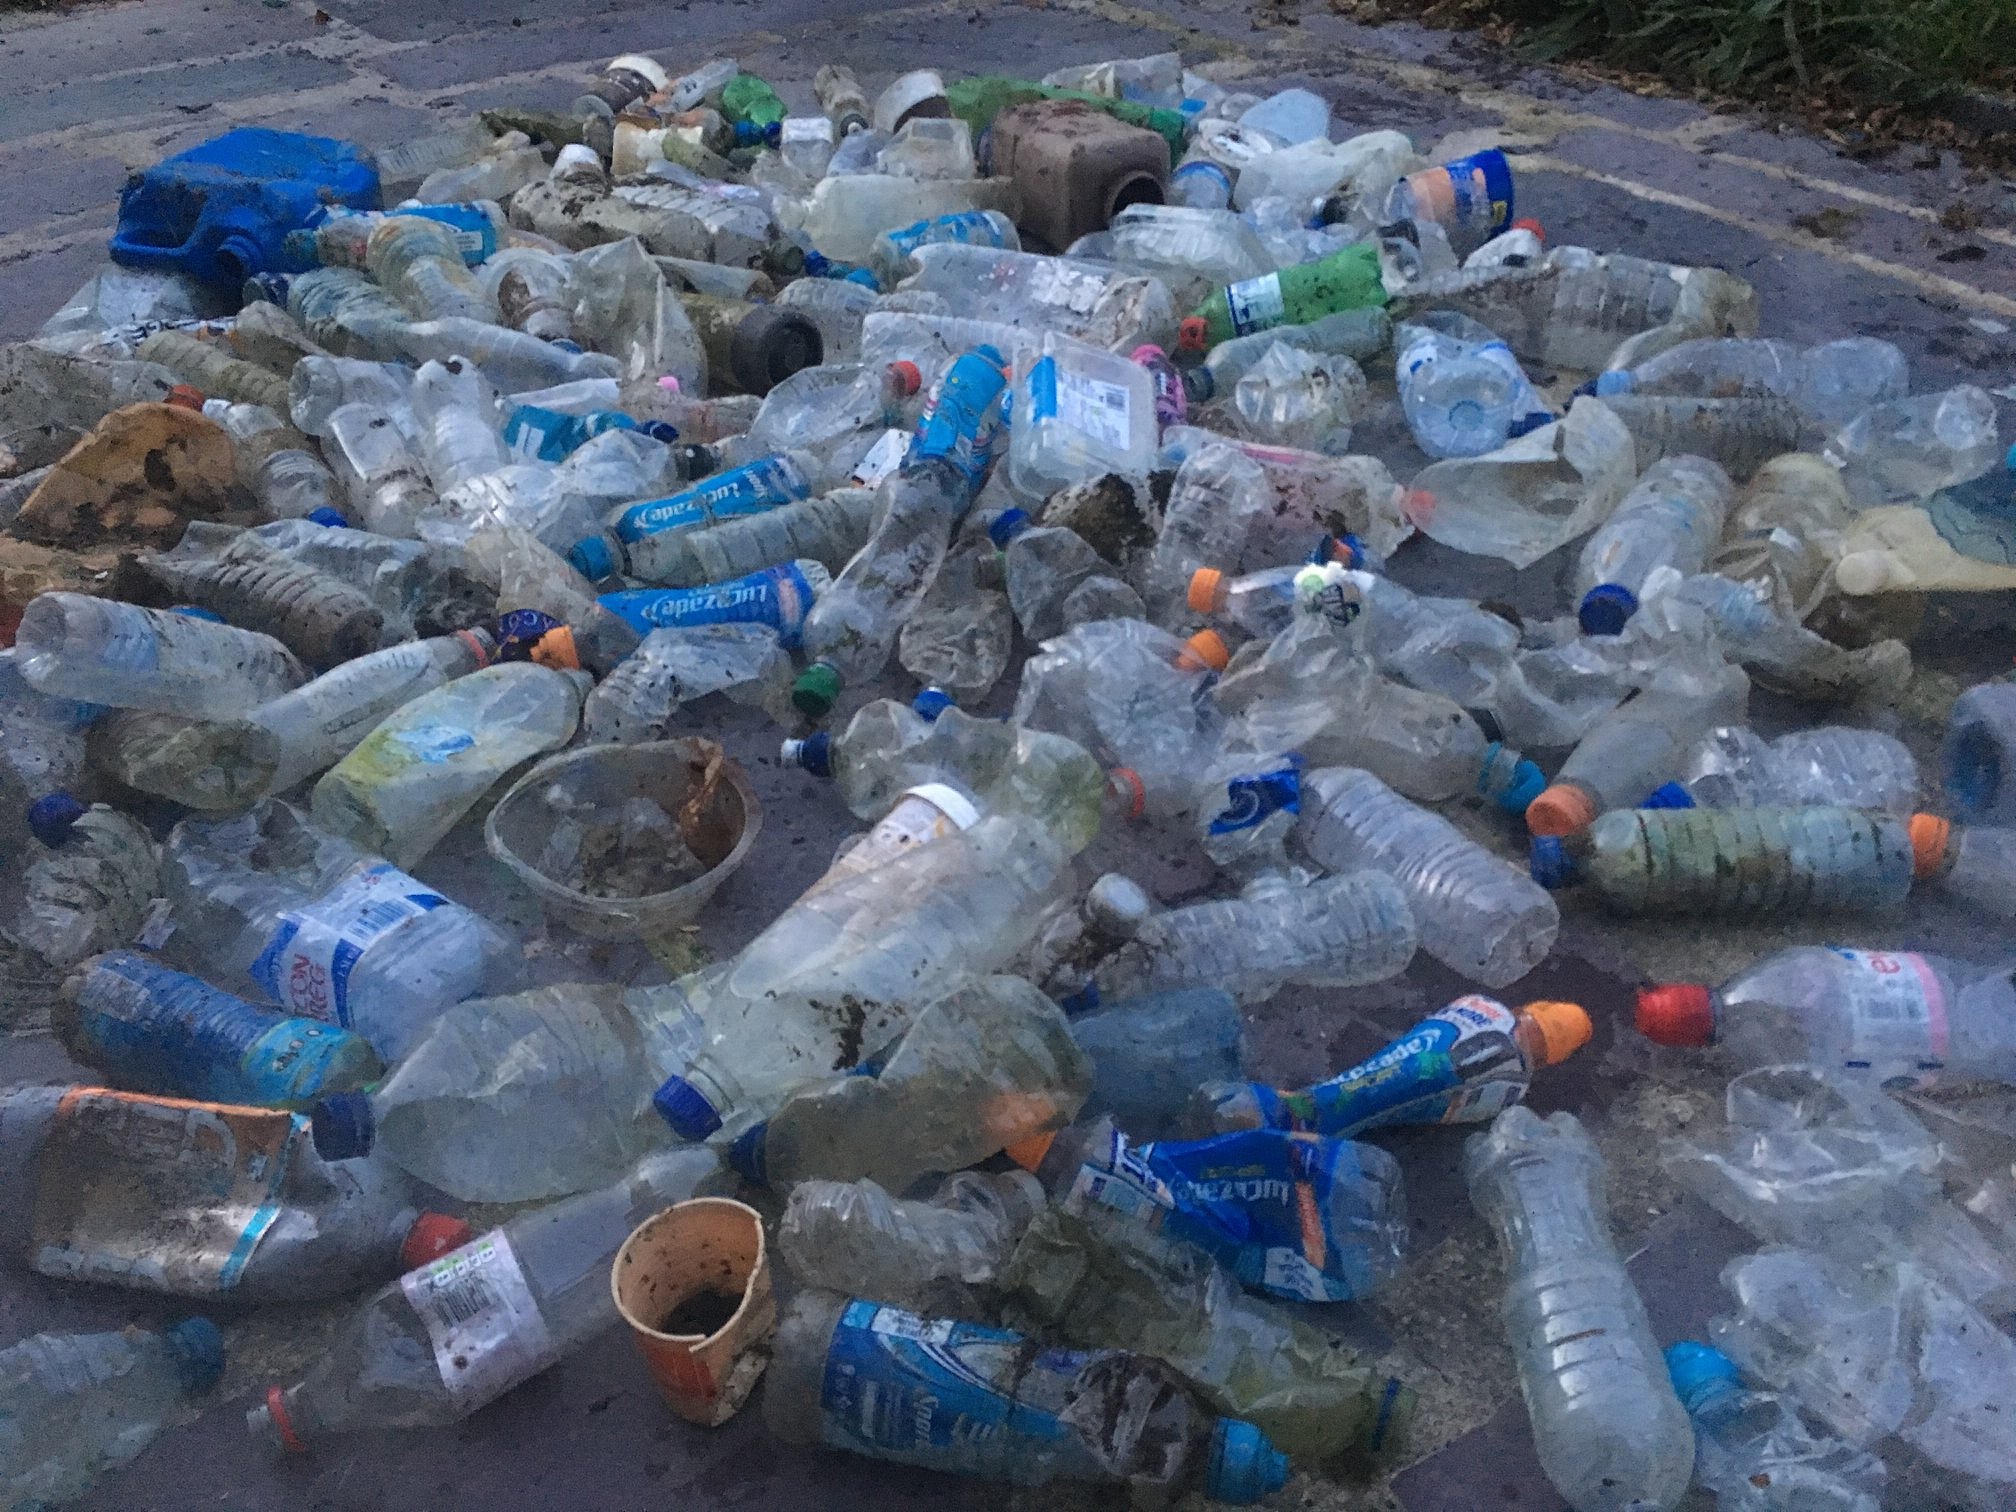 229 plastic bottles were gathered from Snowdon alone in the 2018 event  © Real3Peaks Challenge